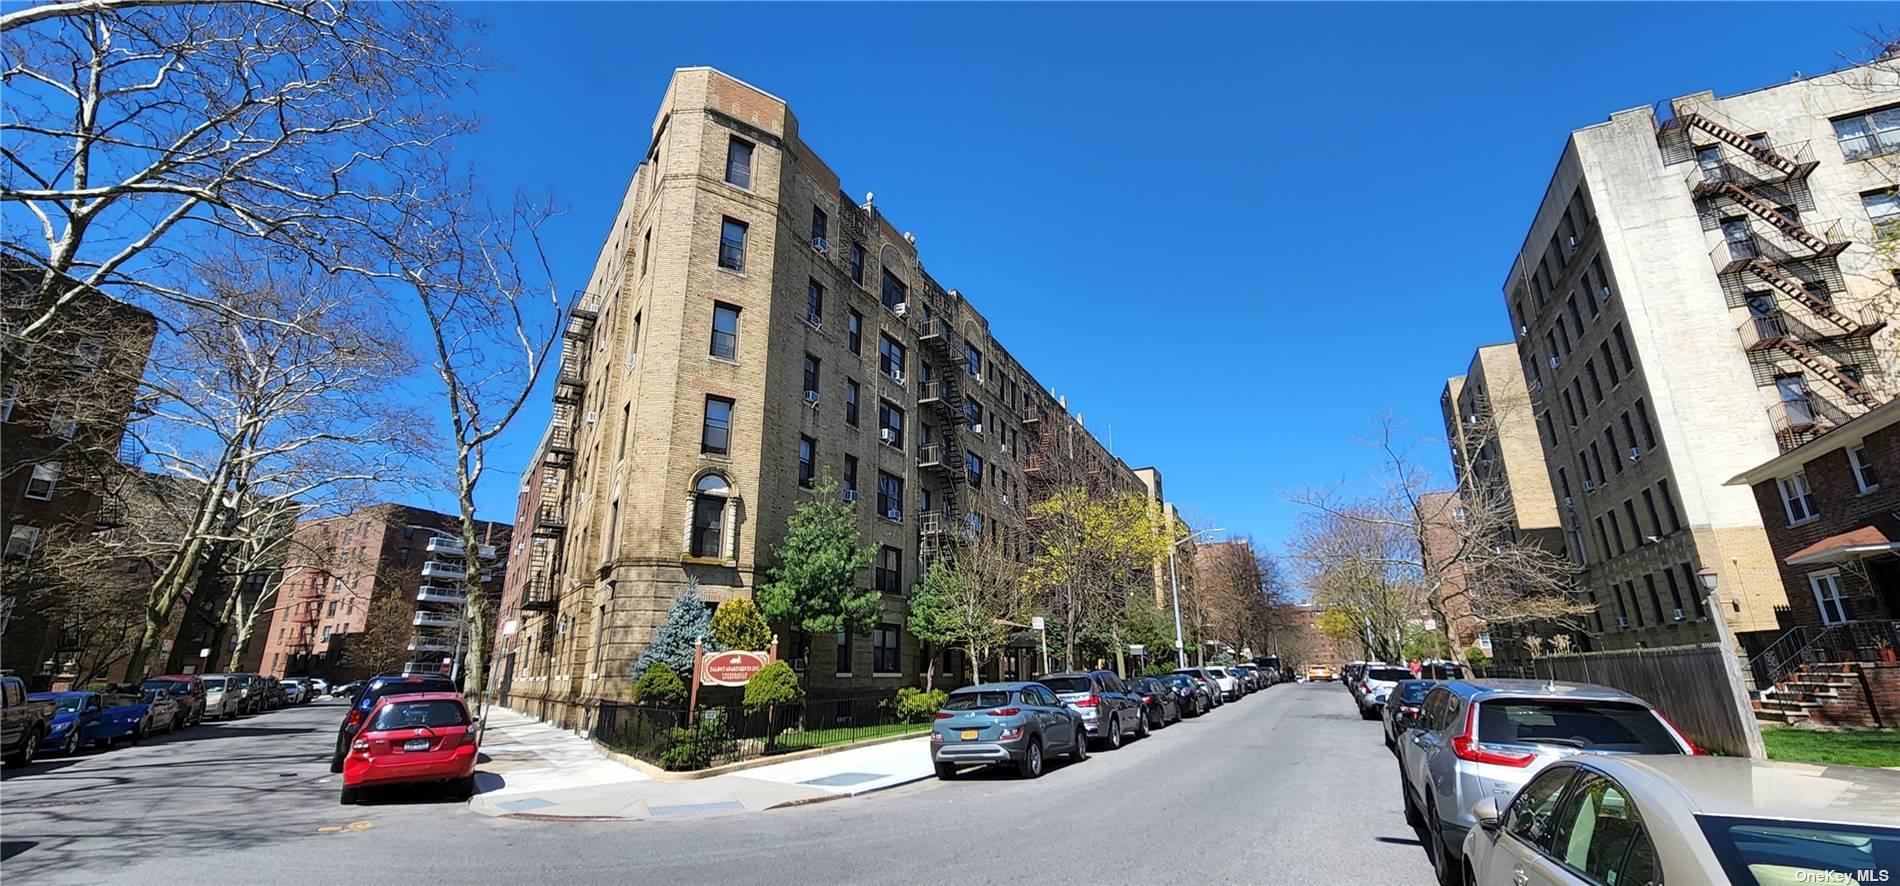 83-64 Talbot Street #6A in Queens, Kew Gardens, NY 11415